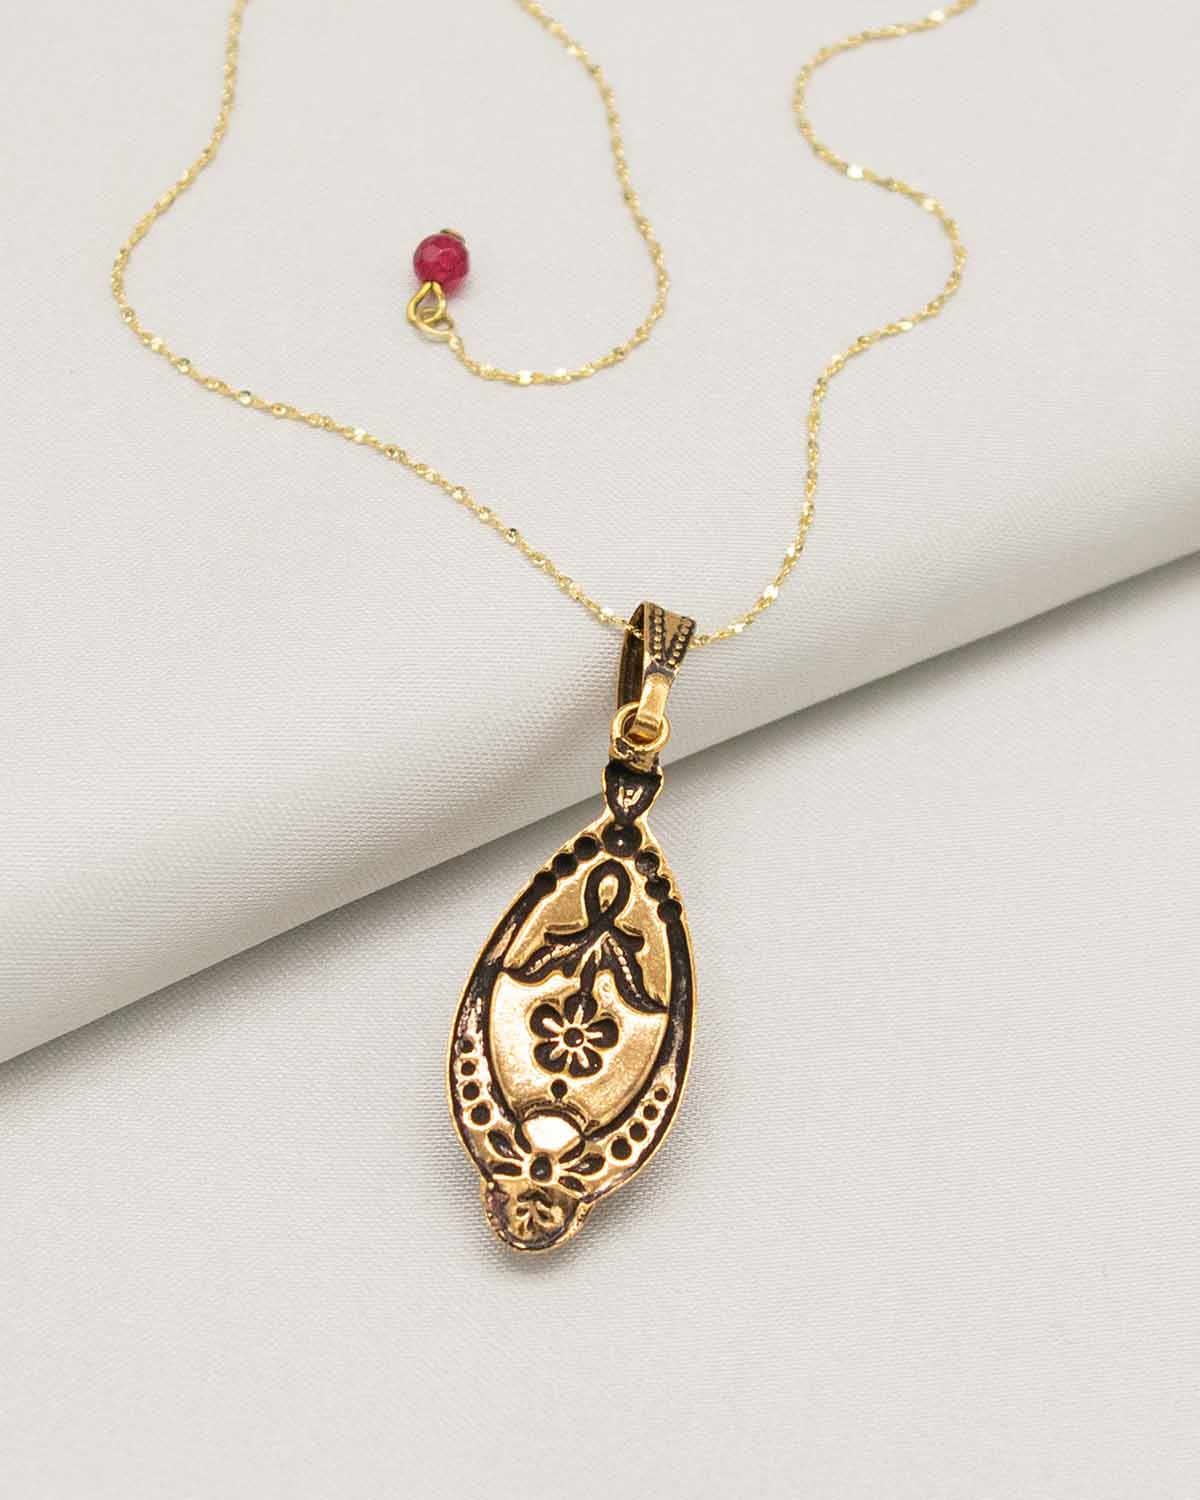 (Handmade Necklace | Magenta Ortica Jewelry Royal – Style Italy) Vintage Pendant in